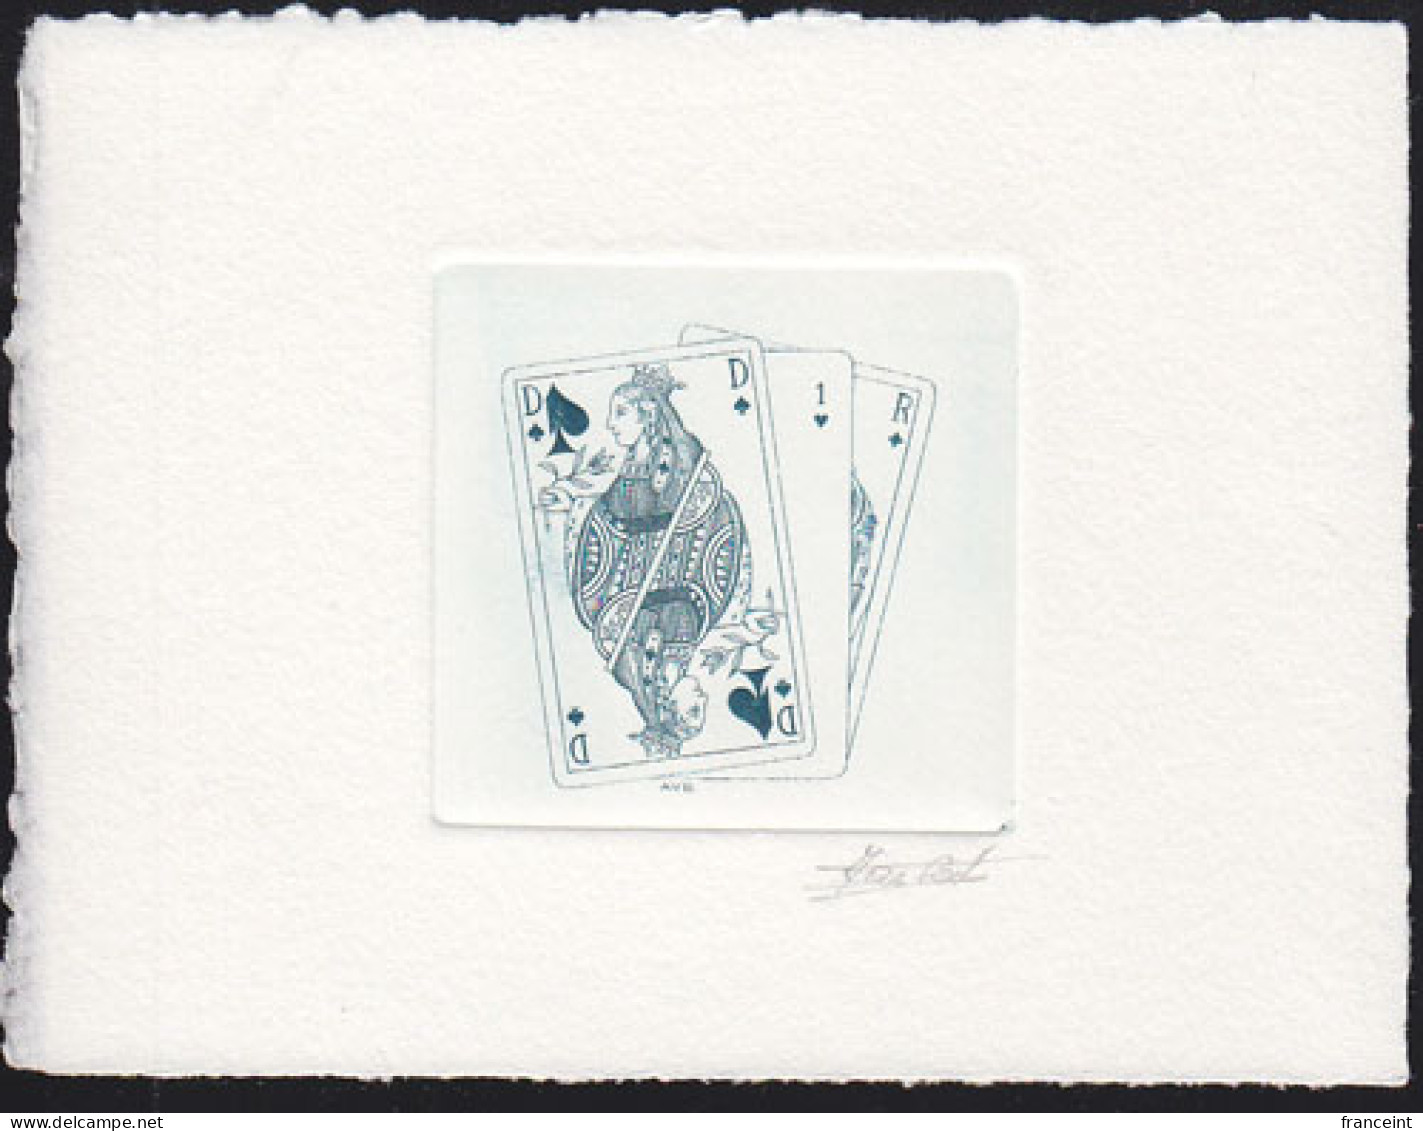 BELGIUM(1995) Playing Cards. Die Proof In Blue Signed By The Engraver, Representing The FDC Cachet. Scott No 1579 - Prove E Ristampe